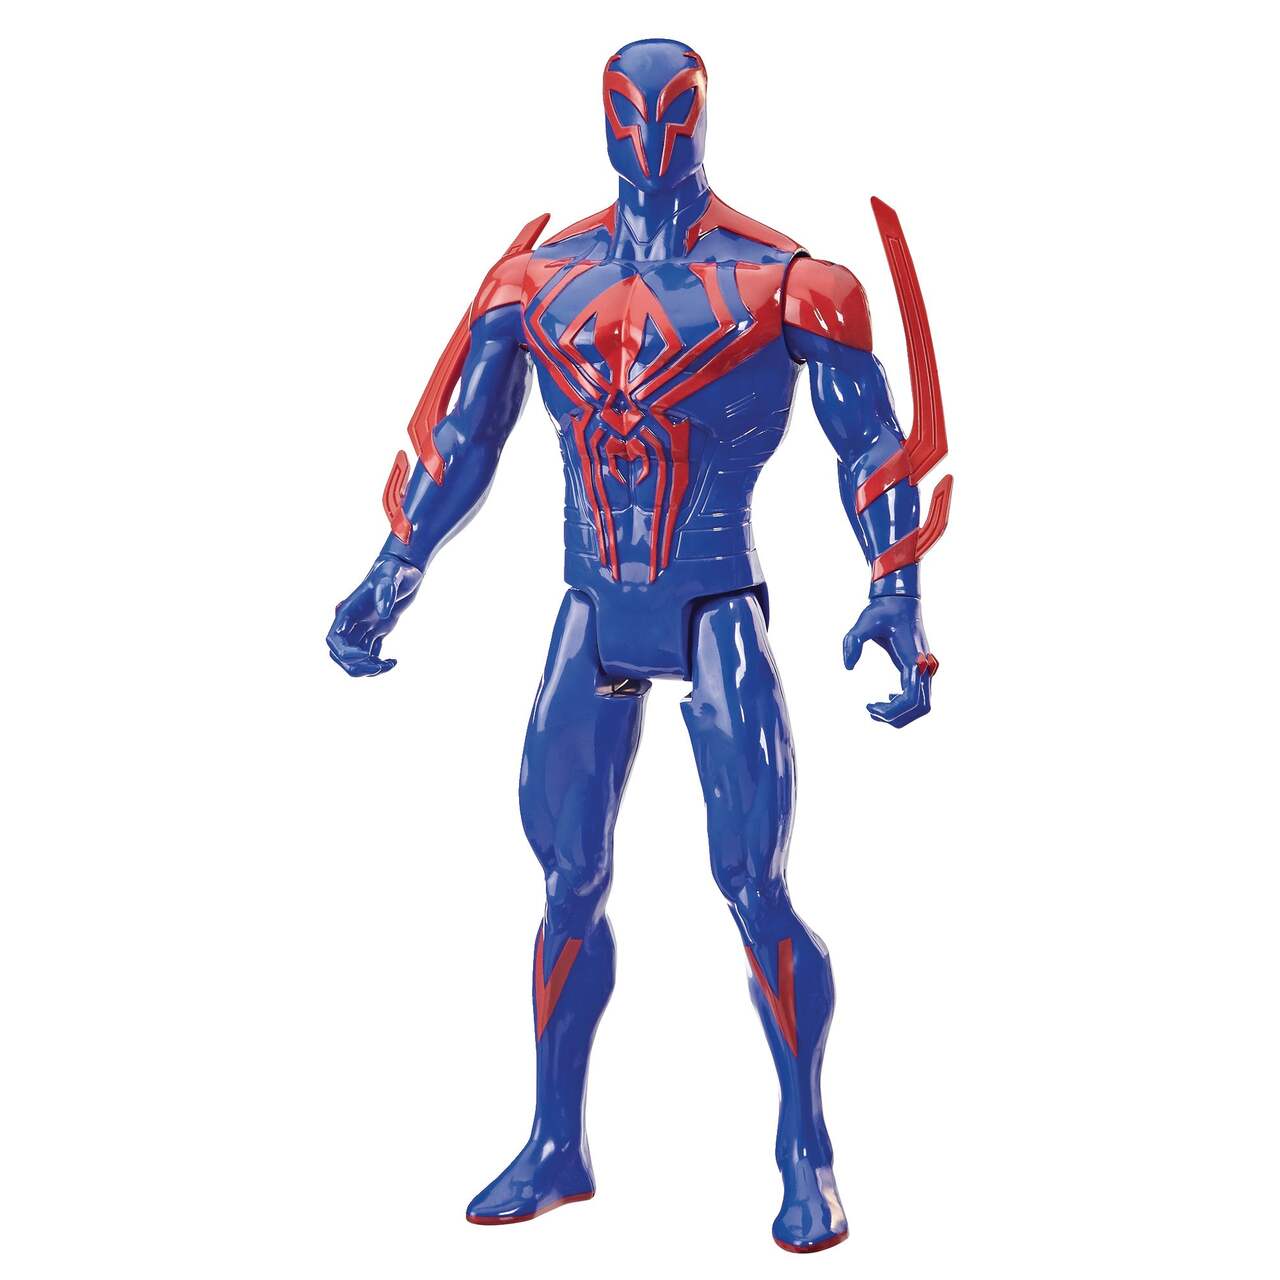 https://media-www.canadiantire.ca/product/seasonal-gardening/toys/toys-games/0509421/marvel-spiderman-12-deluxe-assortment-fe81d5f6-217b-4132-9643-c47193212273-jpgrendition.jpg?imdensity=1&imwidth=640&impolicy=mZoom